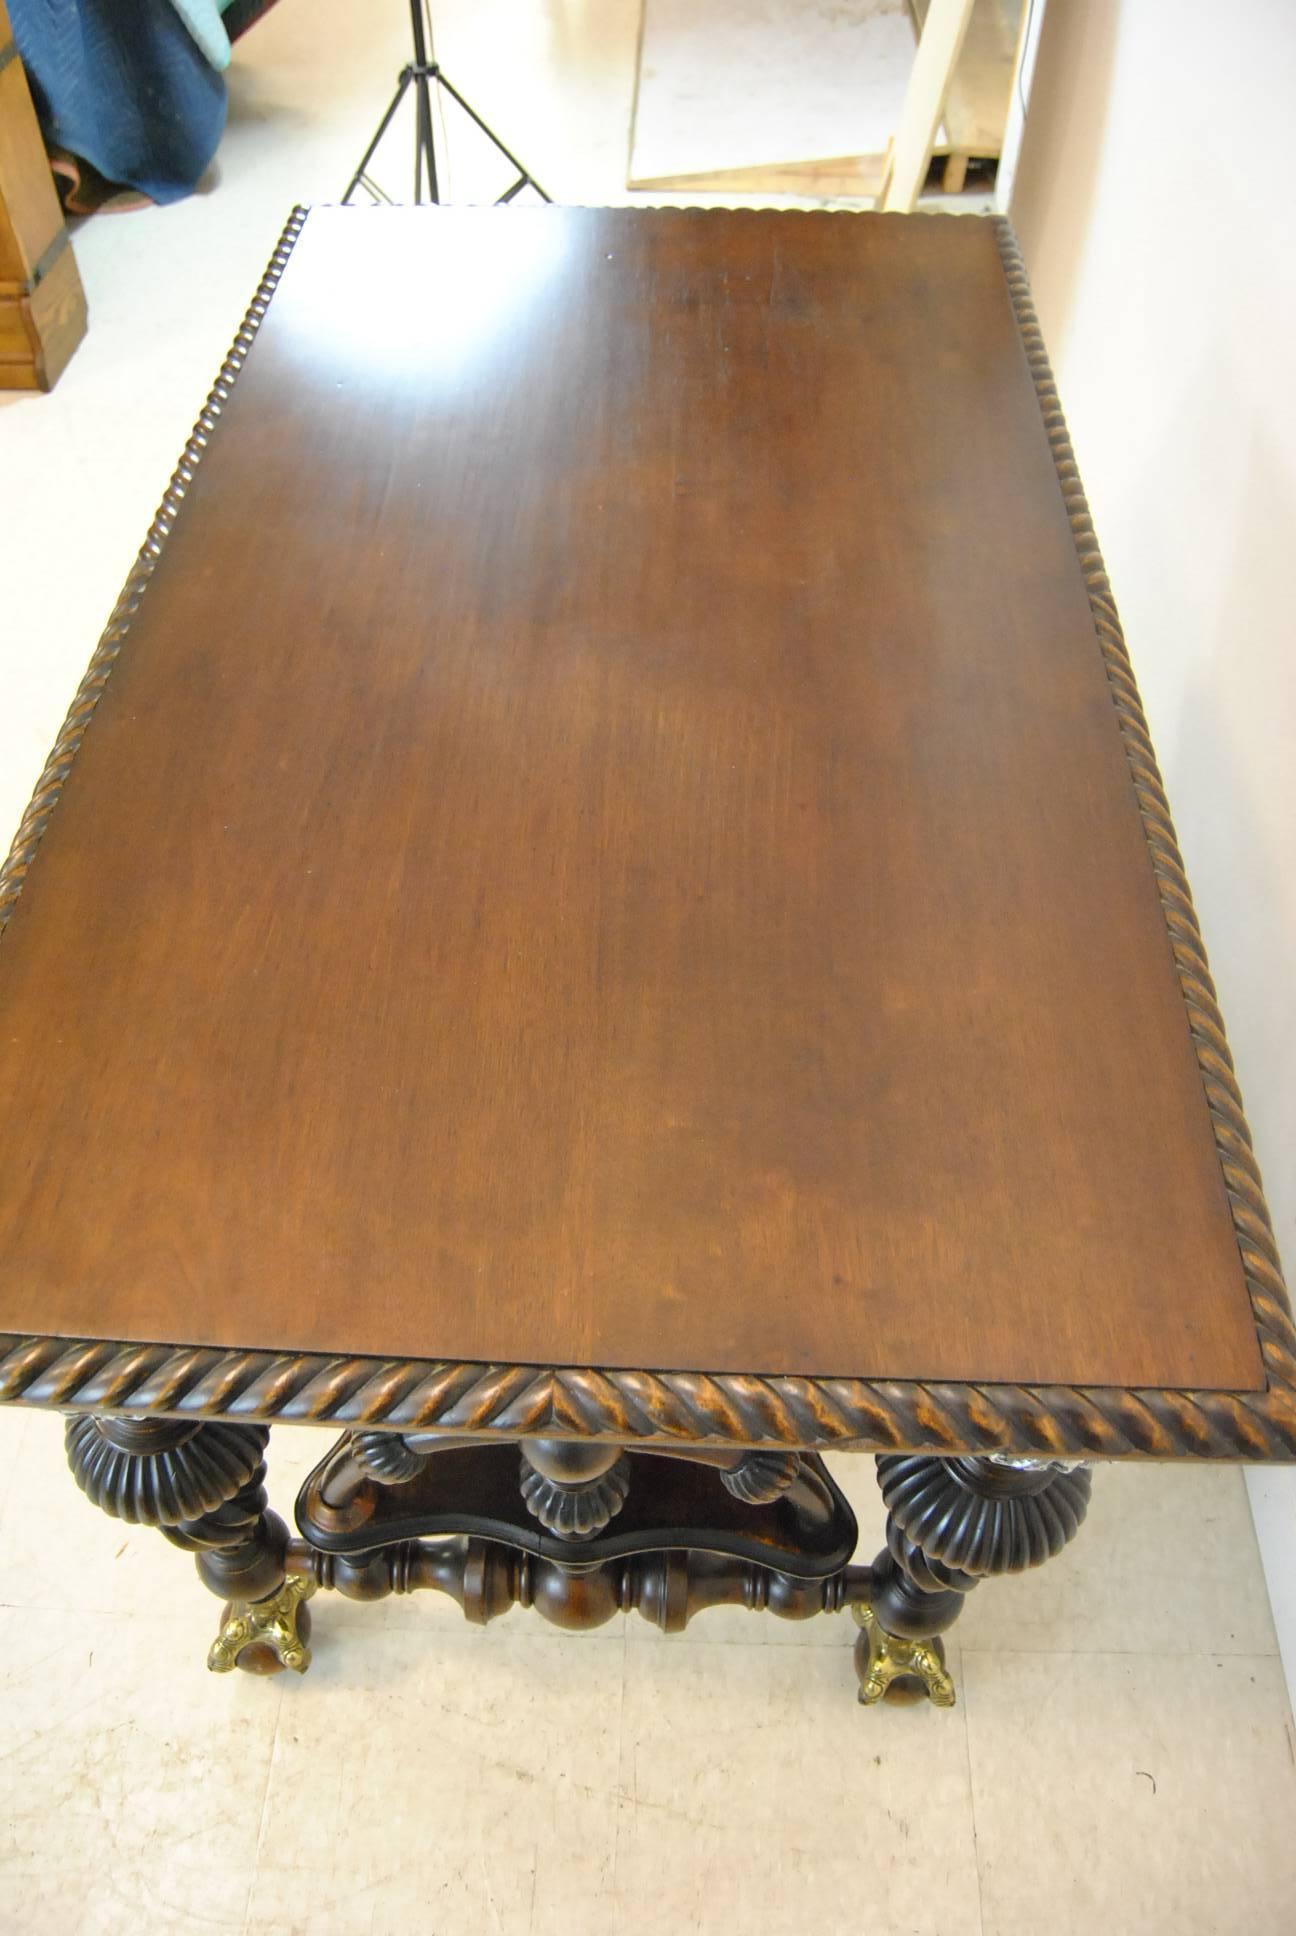 19th Century Antique Mahogany Library Table with Mythical Male Figure and Rope Twist Detail